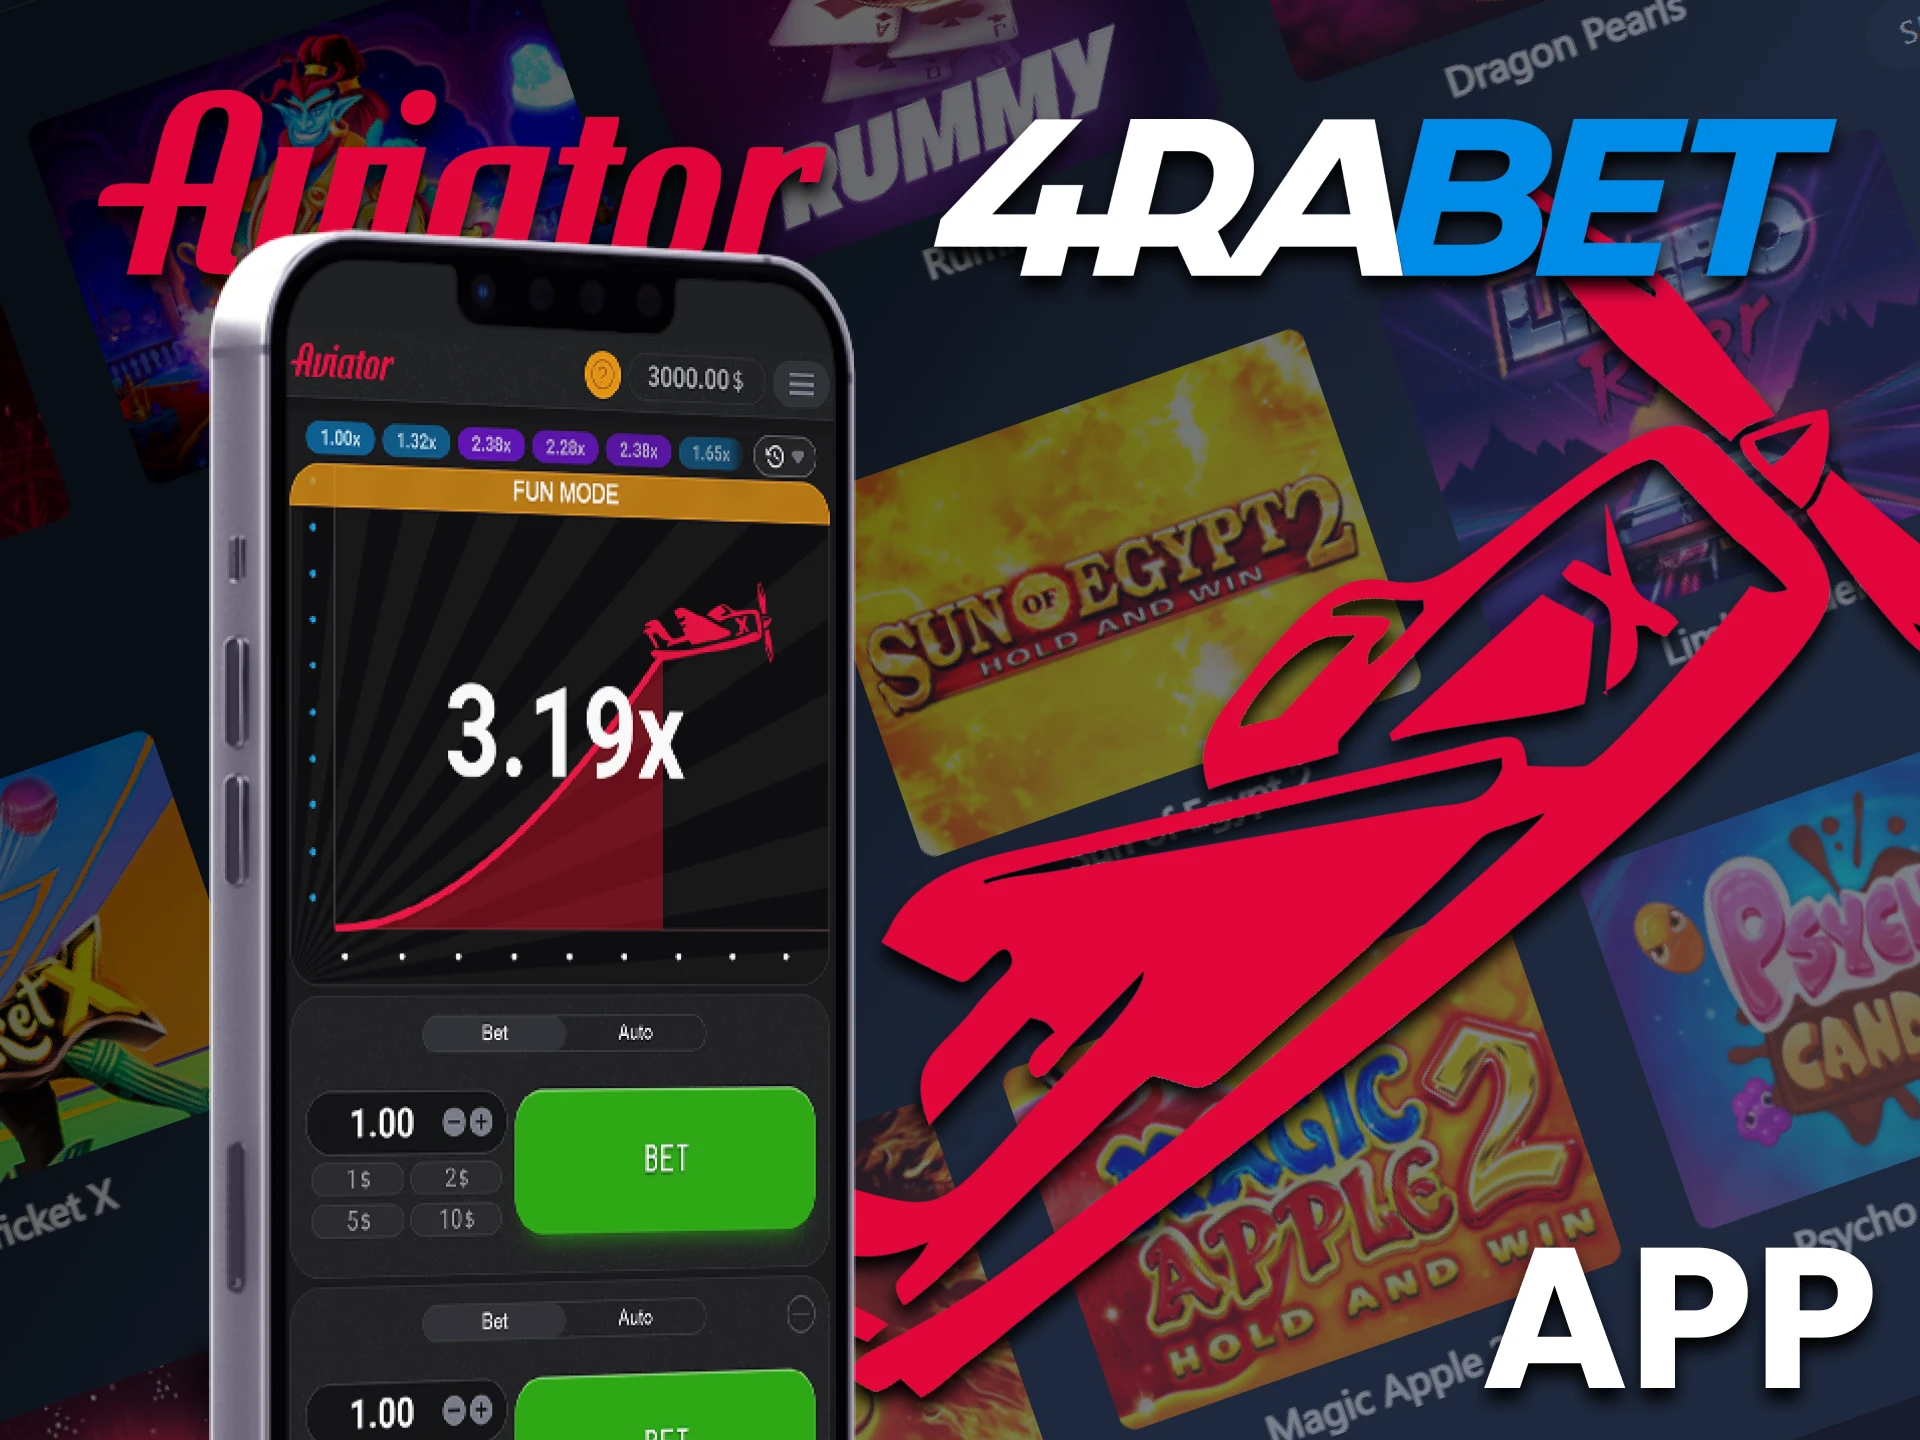 You can play the Aviator game in the official 4rabet app.